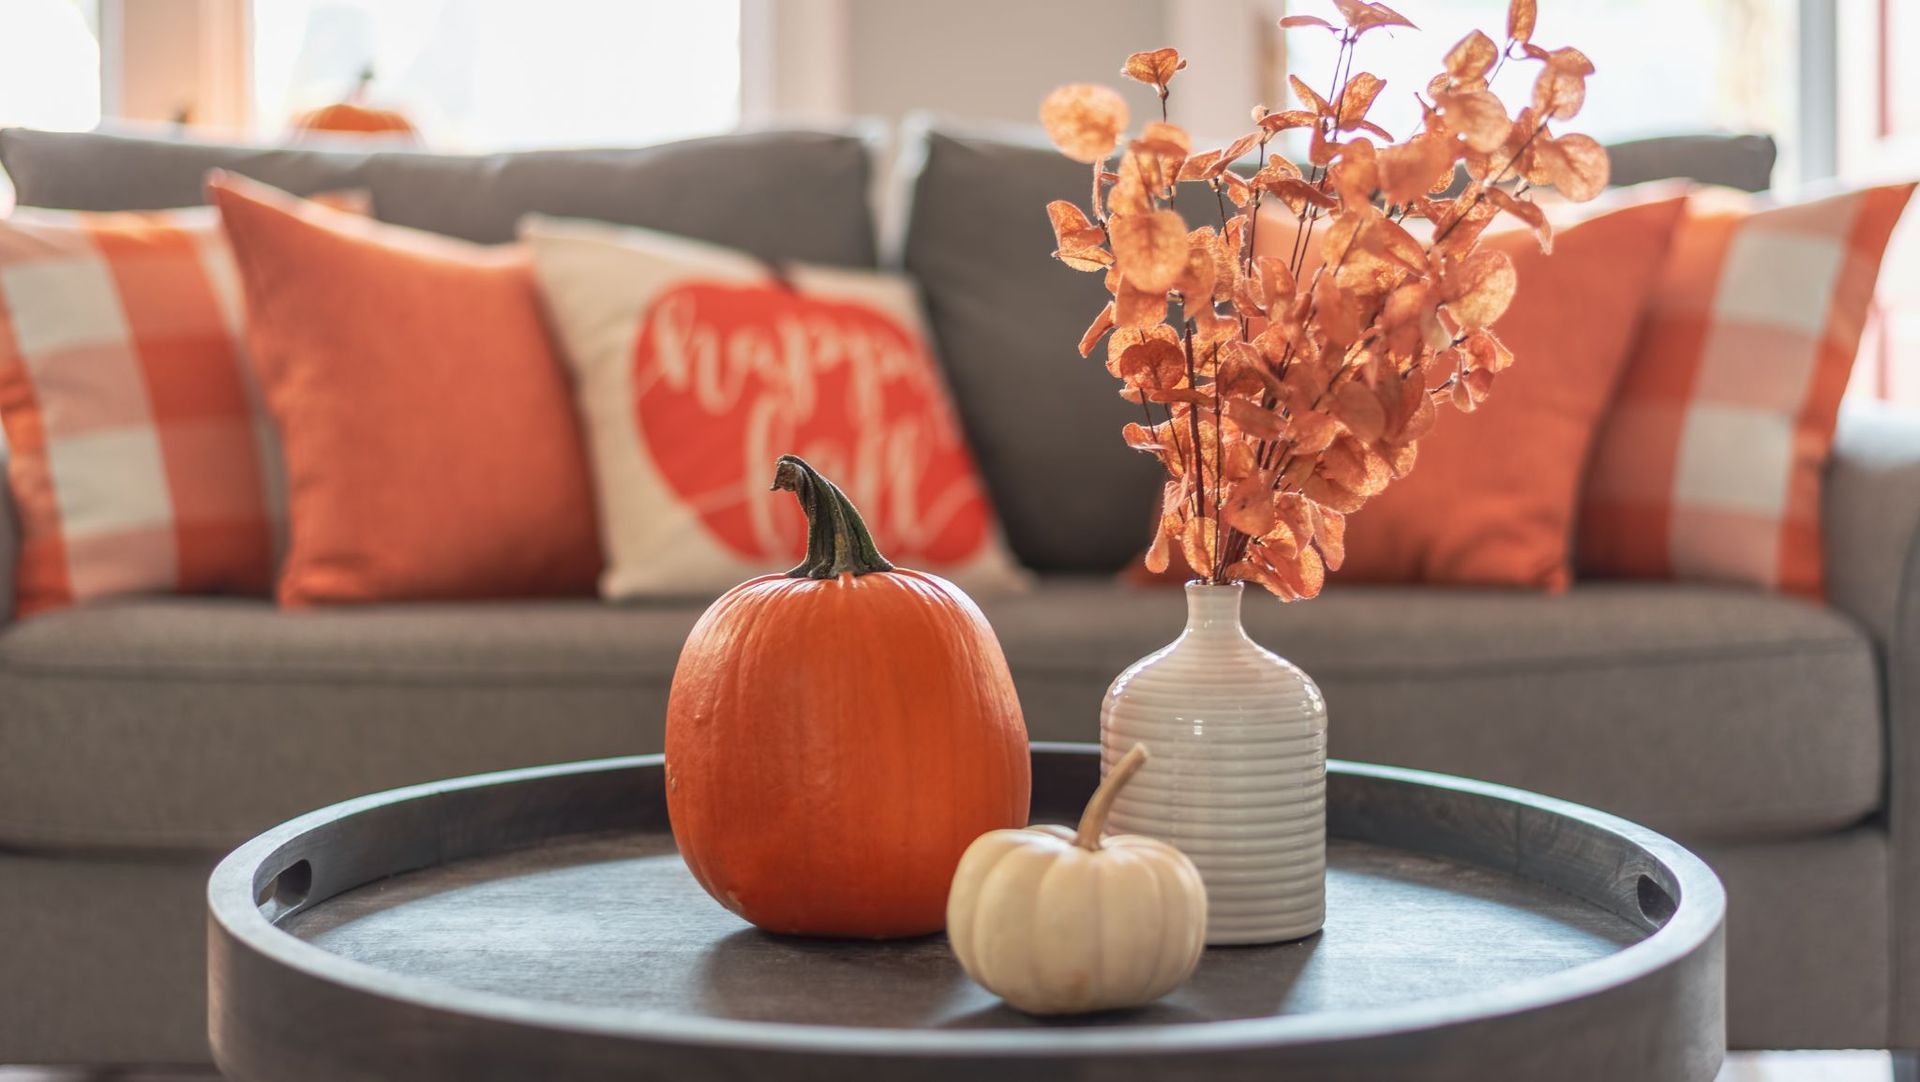 Rental Renovations on a Budget: Transform Your Property For Fall